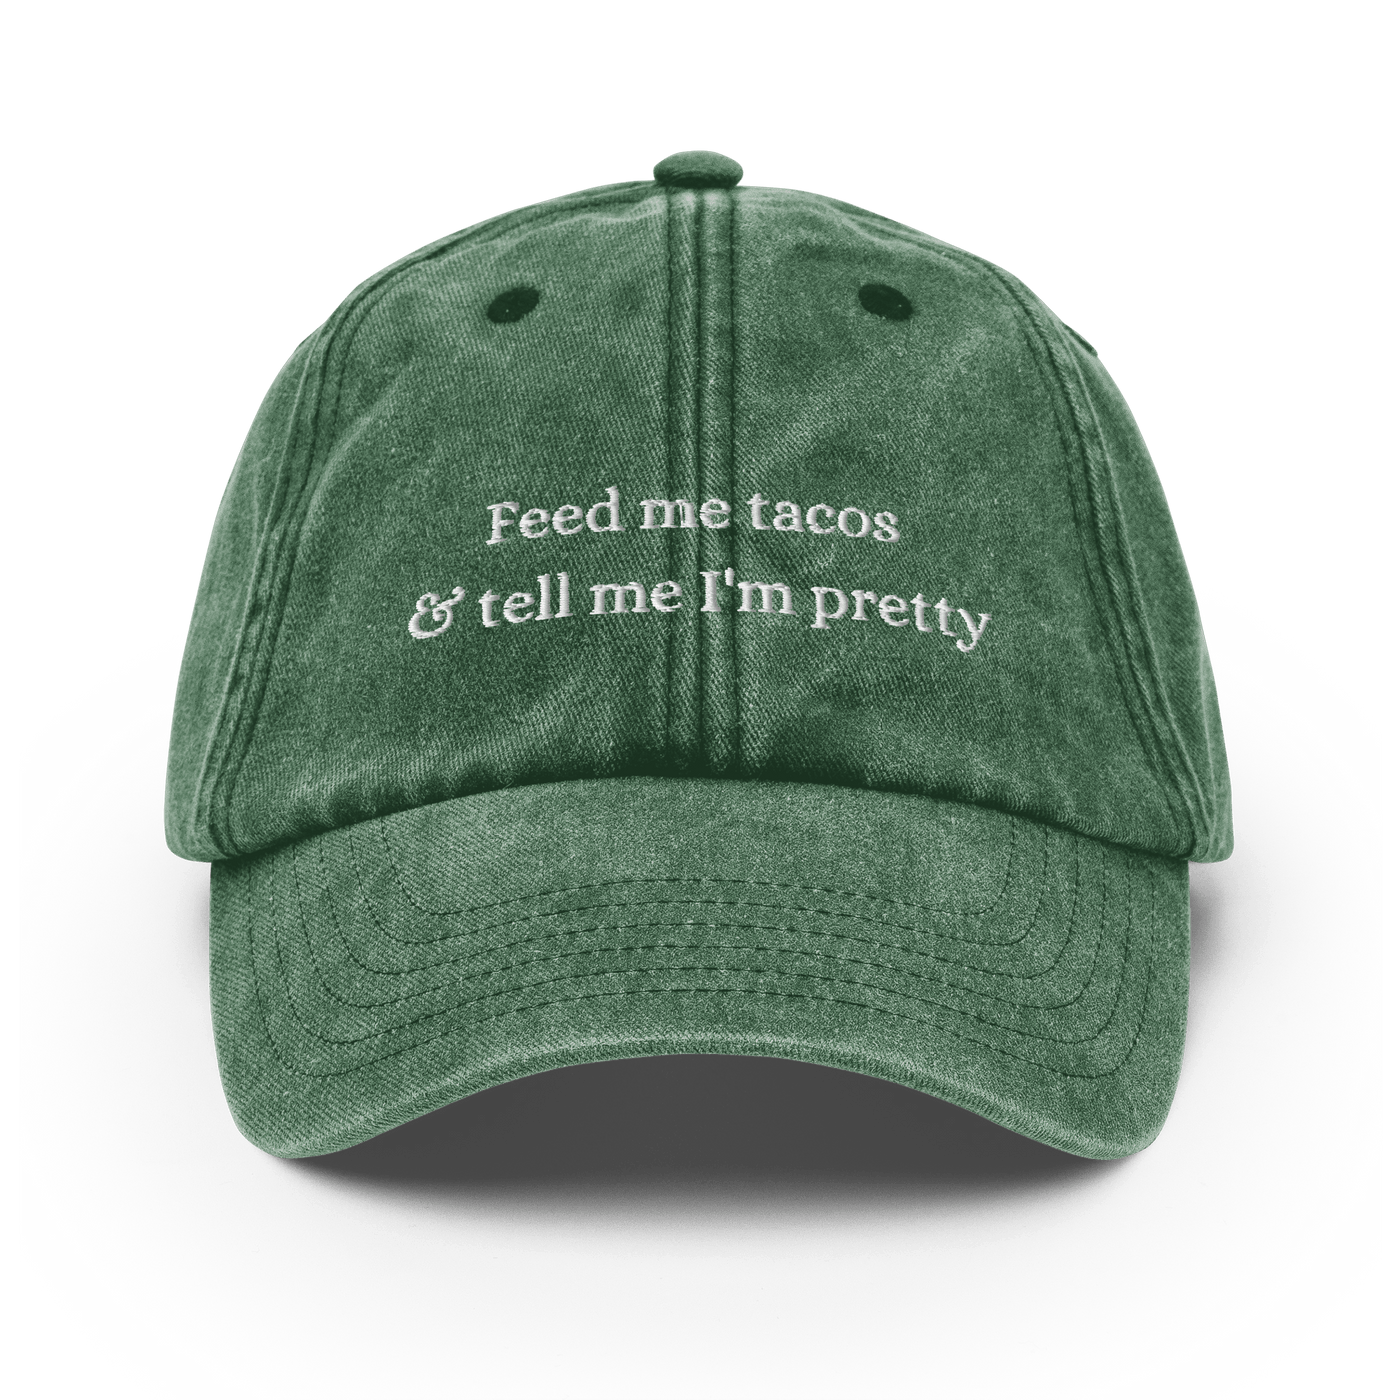 Feed me tacos & tell me I'm pretty Vintage Hat - Vintage Bottle Green - - Just Another Cap Store